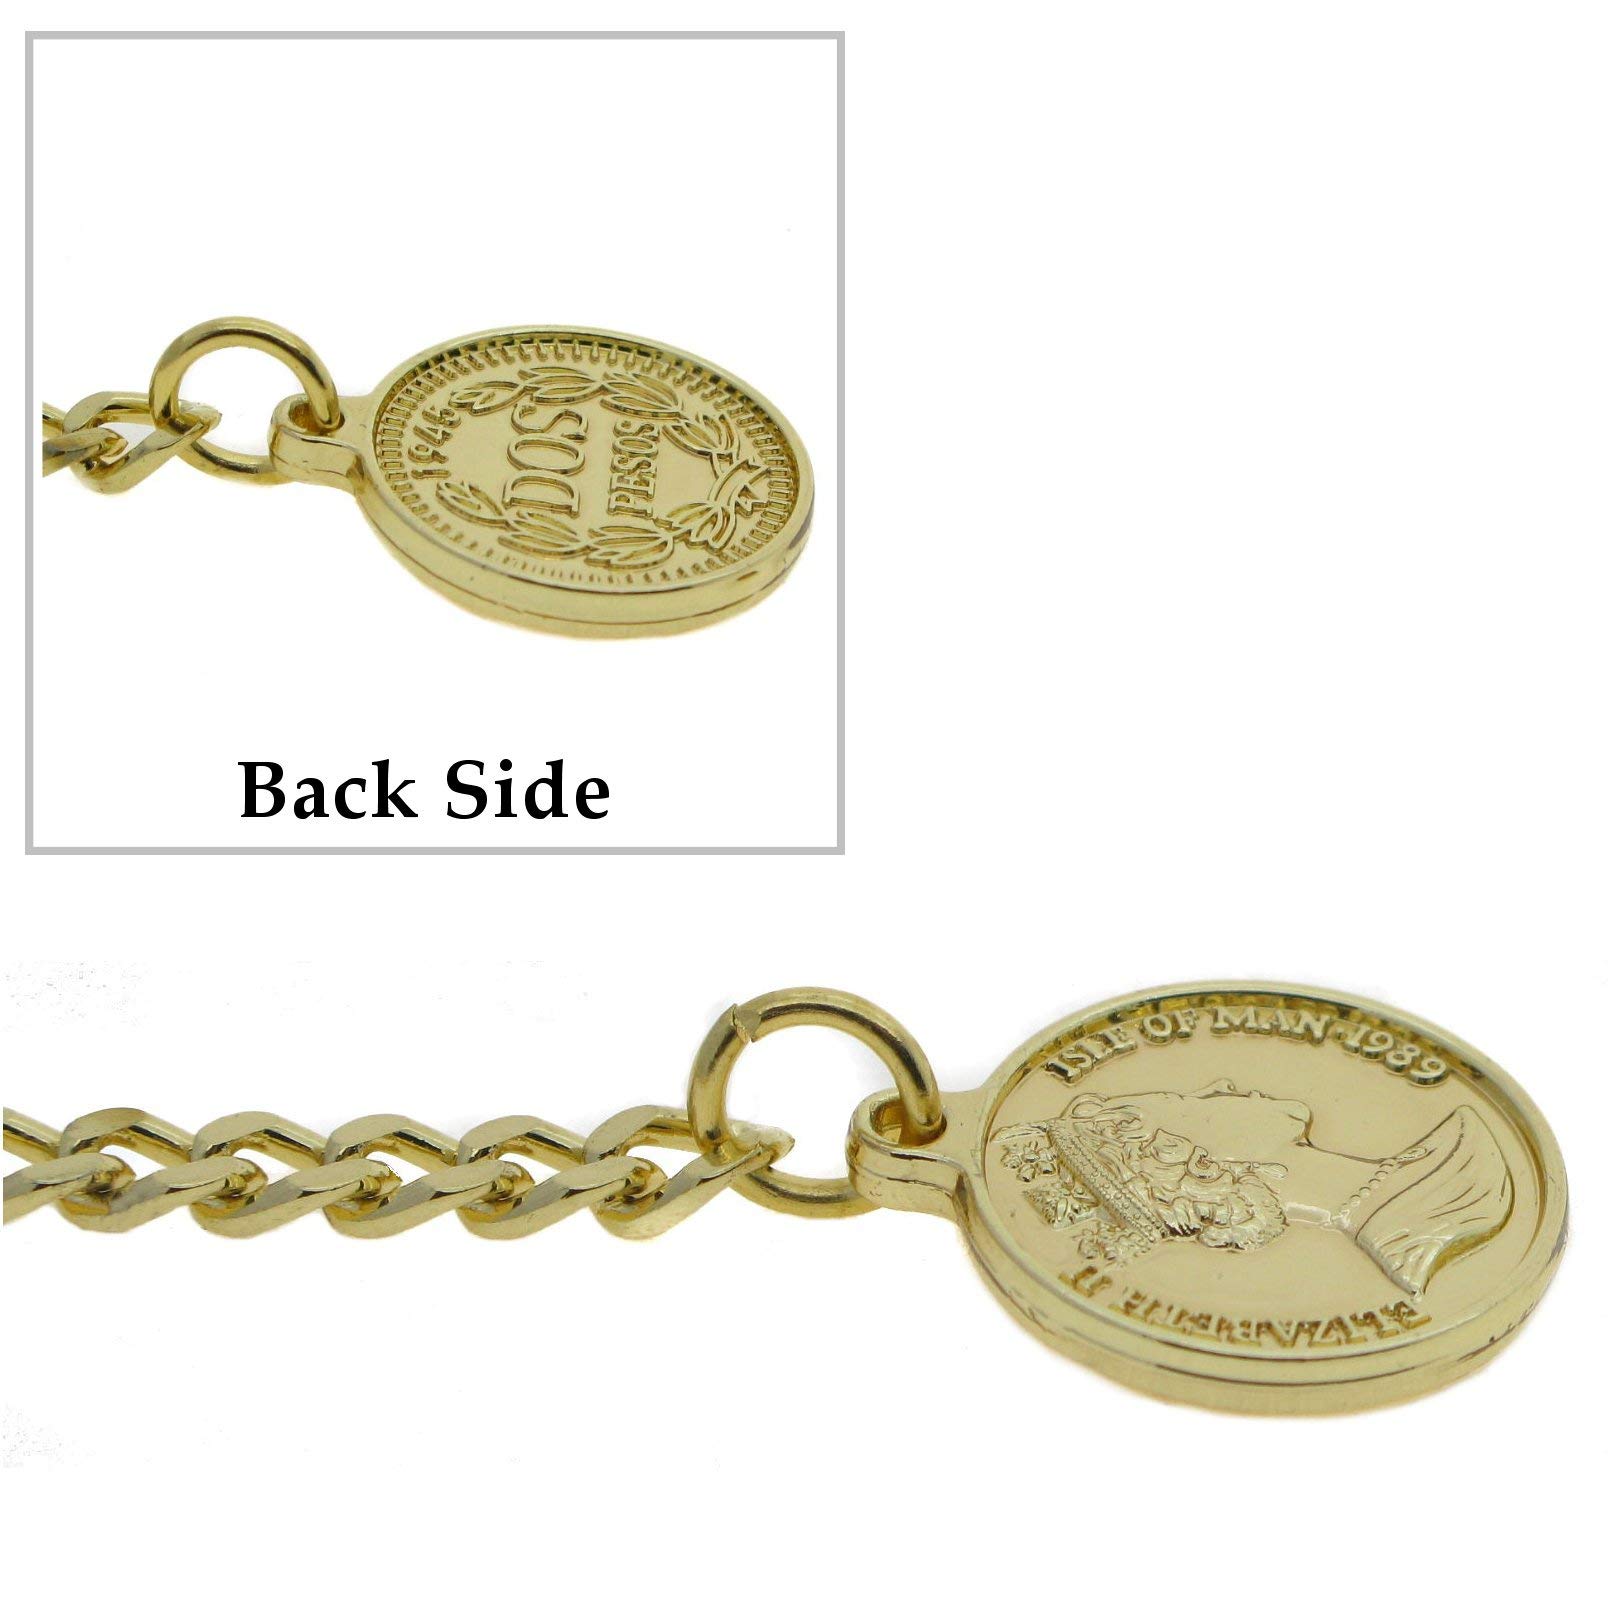 Albert Chain Gold Color Pocket Watch Chains for Men with T Bar Swivel Clasp and Queen Elizabeth II Coin Design Fob AC100